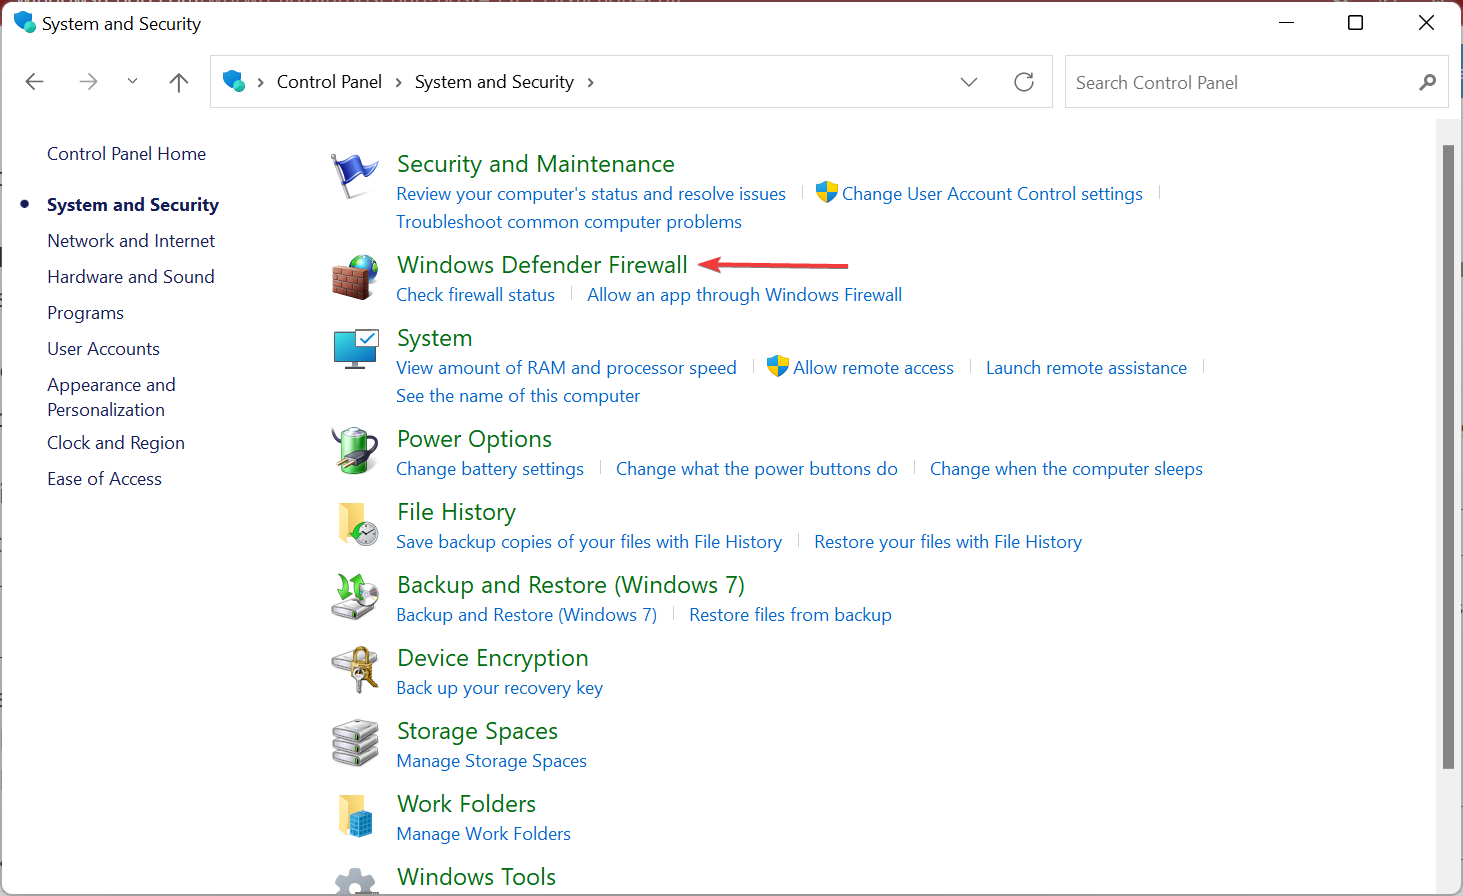 Windows Defender Firewall to fix something went wrong and outlook couldn't set up account